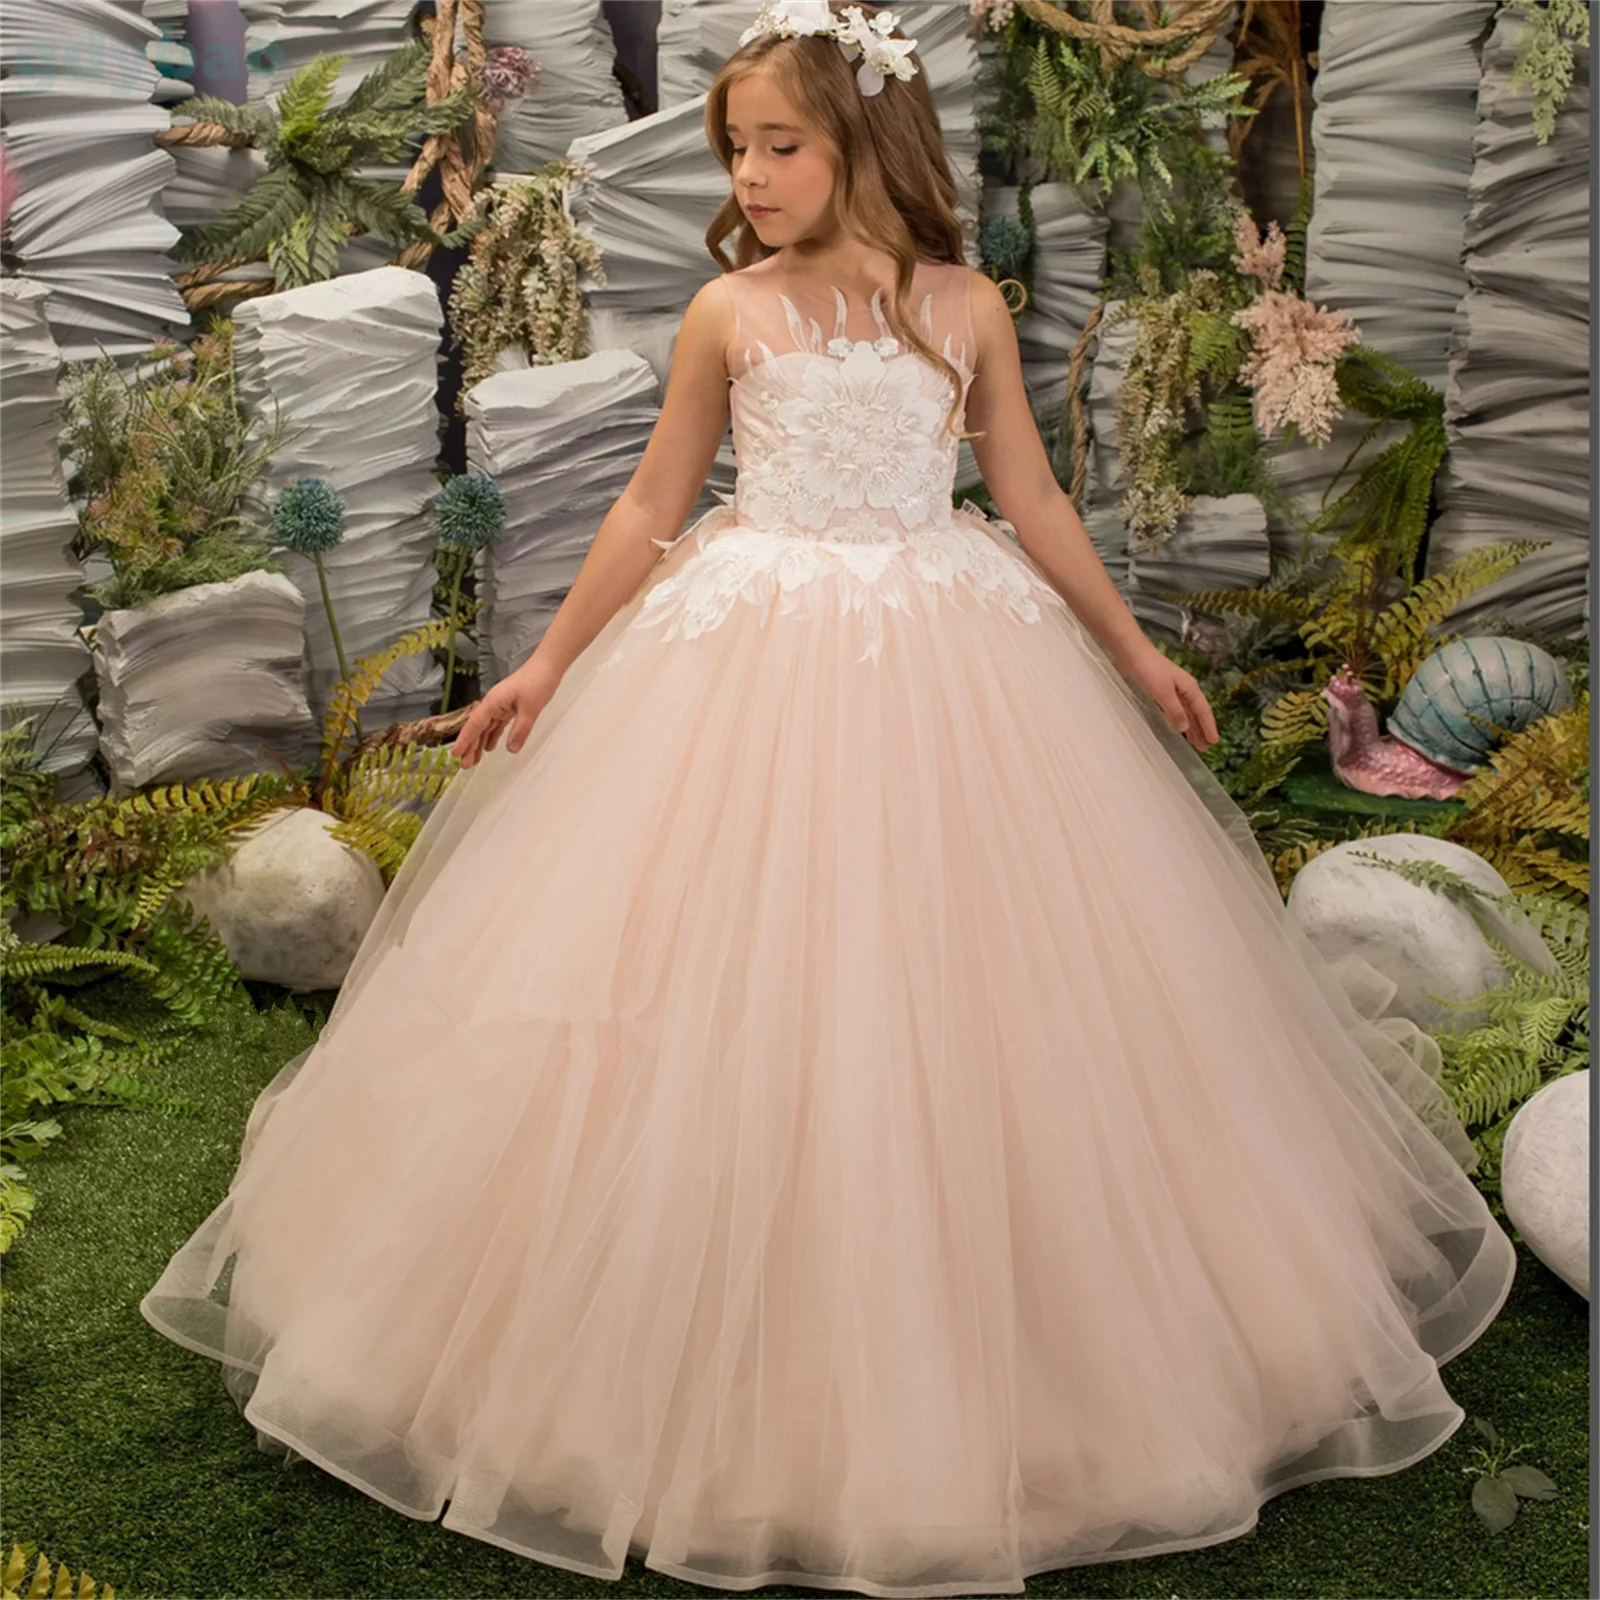 

A+Blush Lace Appliqued Flower Girl Dresses Tulle Beading Appliqued Pageant For Girls First Communion Dresses Kids Prom Dresses